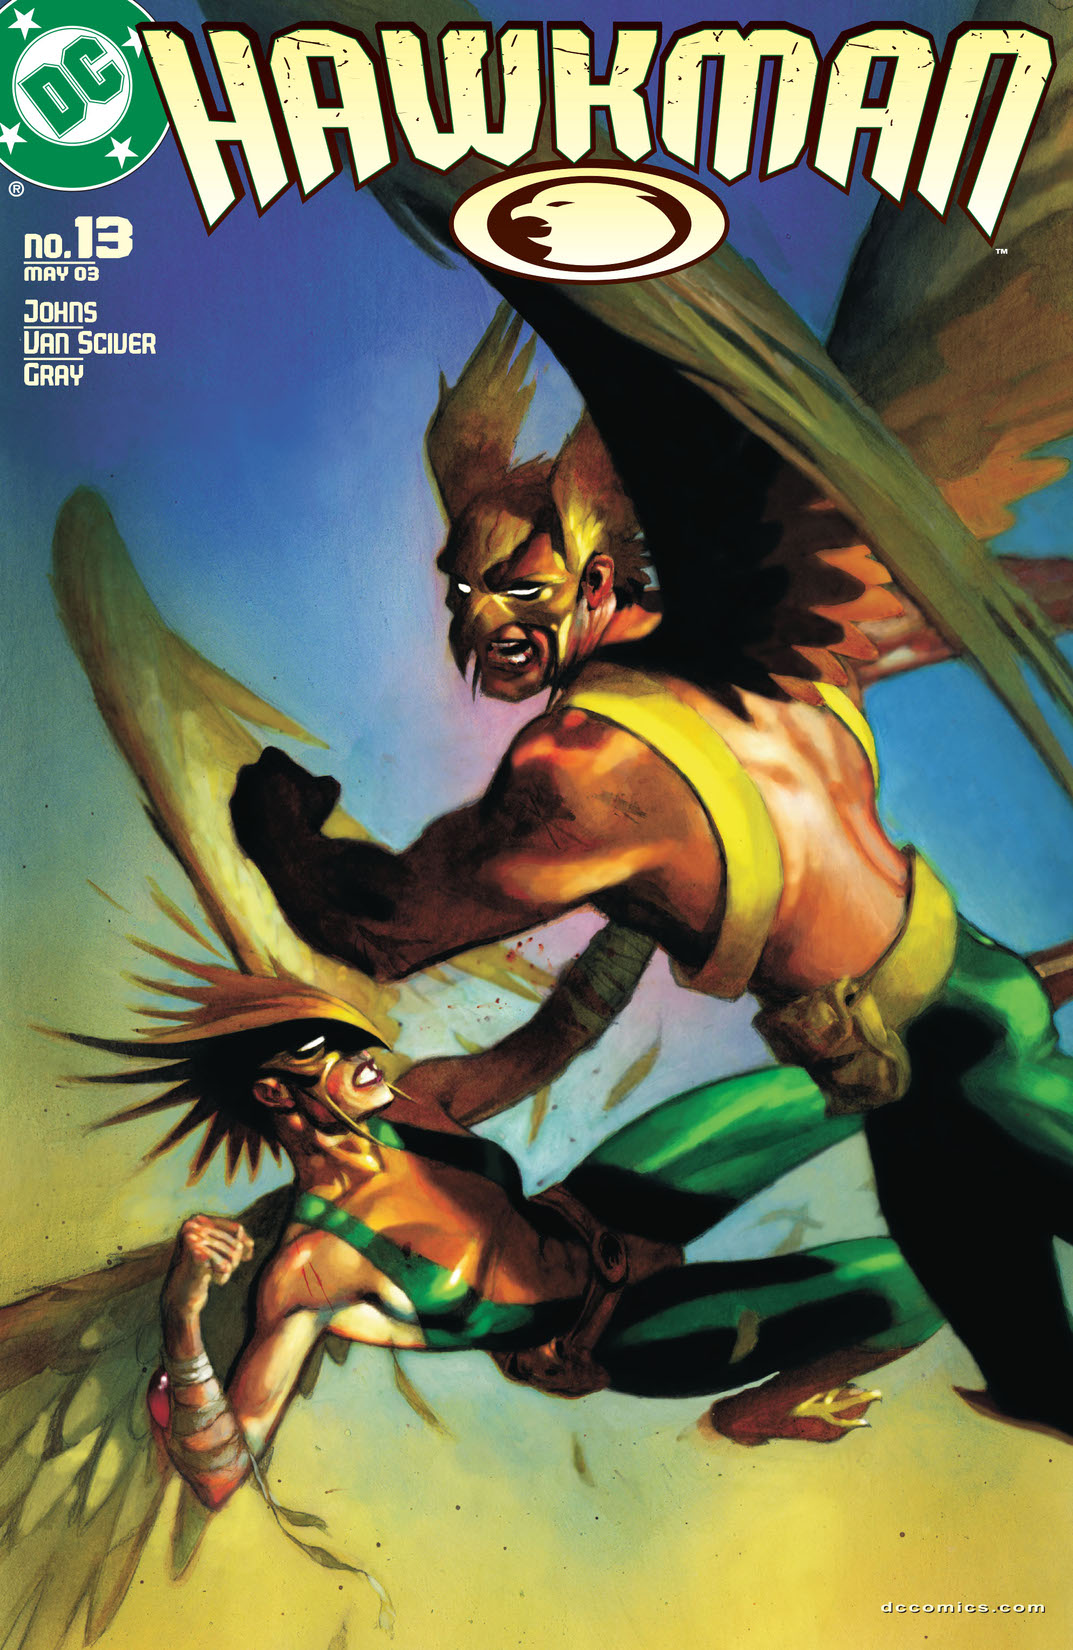 Hawkman (2002-) #13 preview images